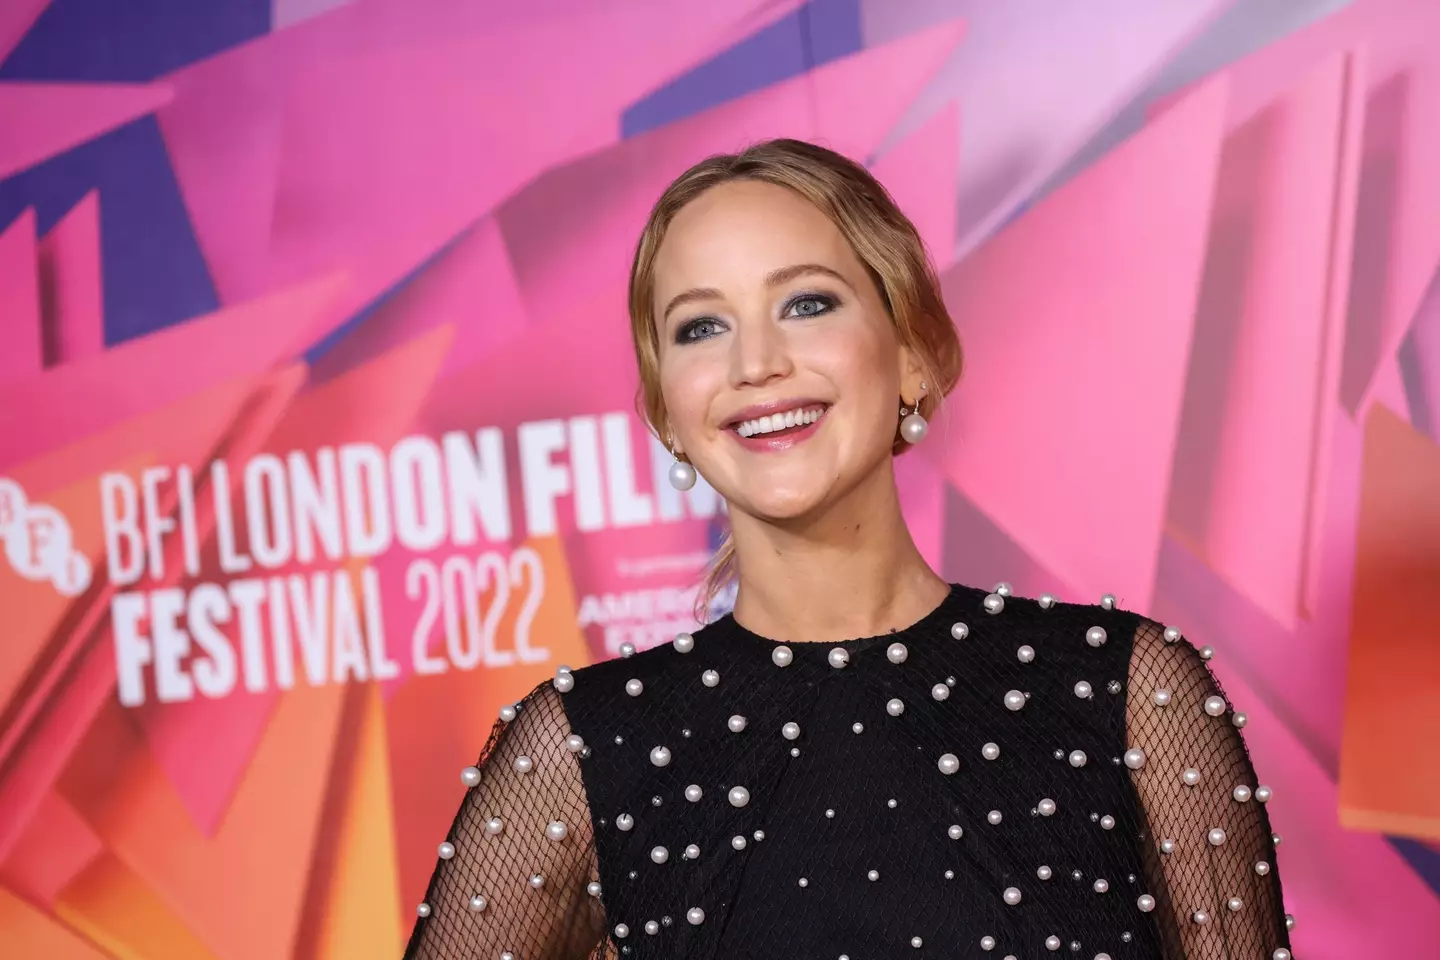 Jennifer Lawrence was one of the many victims of the hacking scandal in 2014.